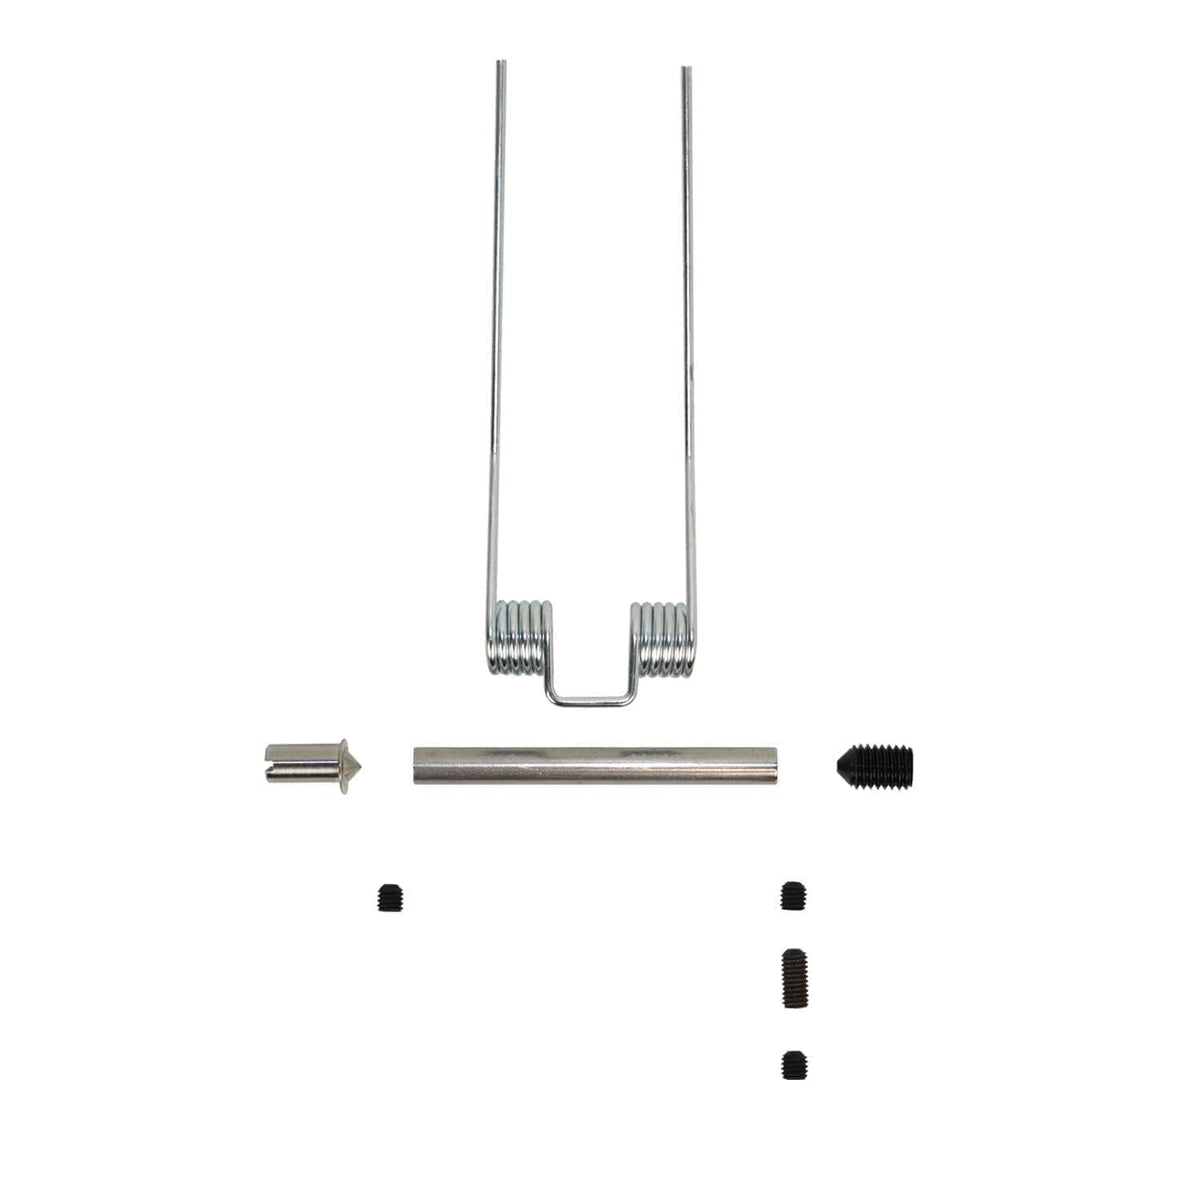 Lid hinge pin kits for use with post 1995 Aga range cookers